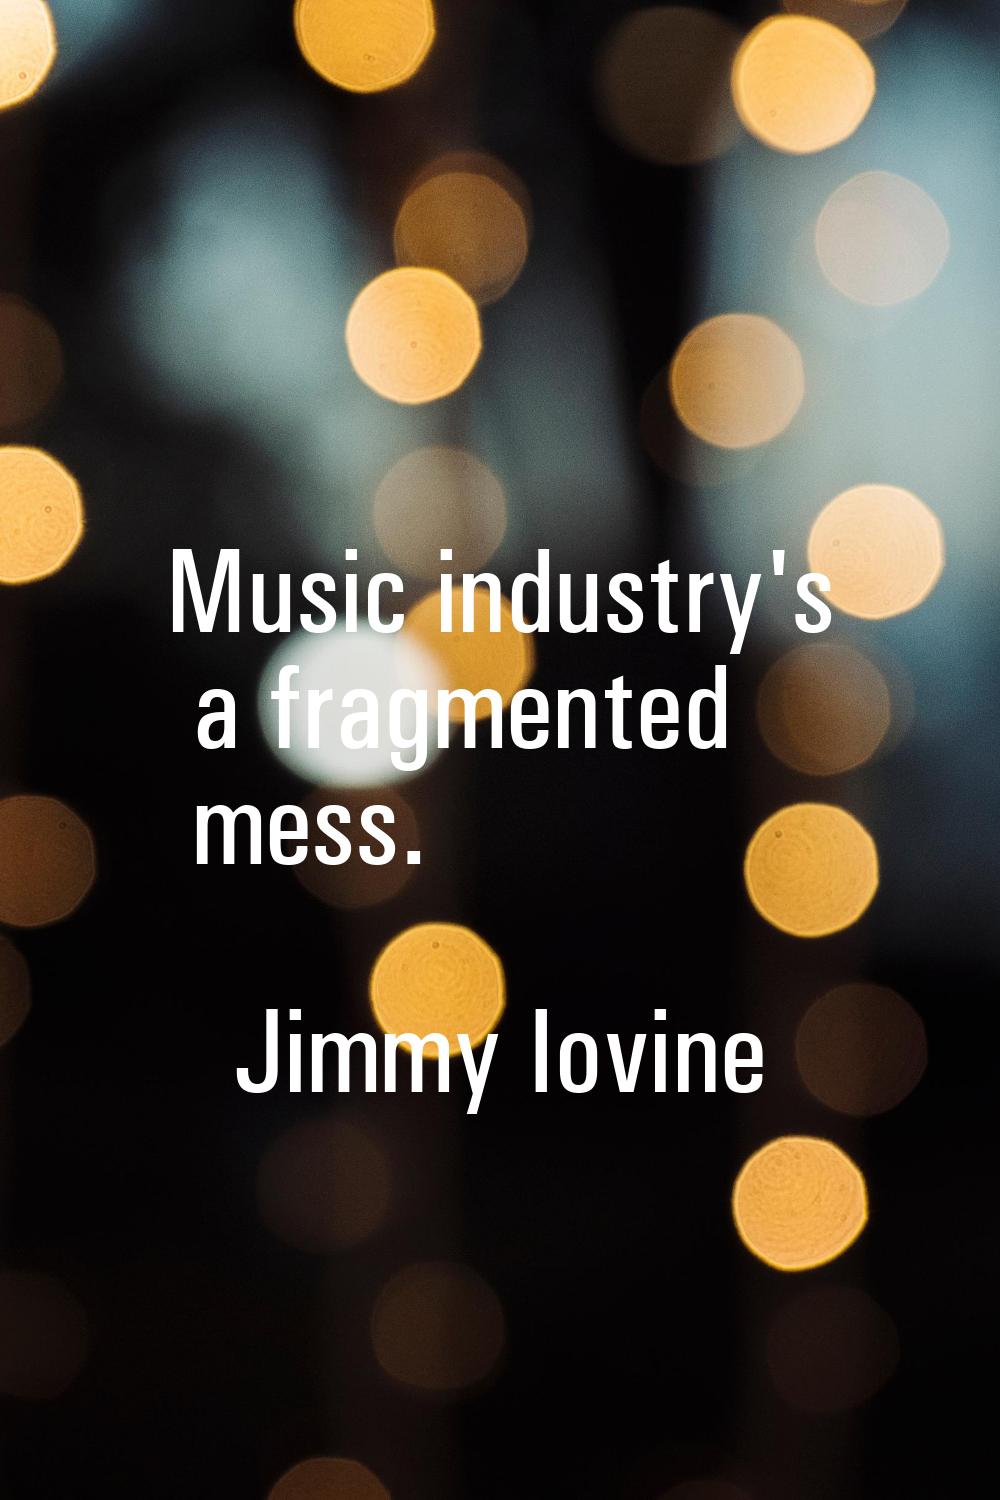 Music industry's a fragmented mess.